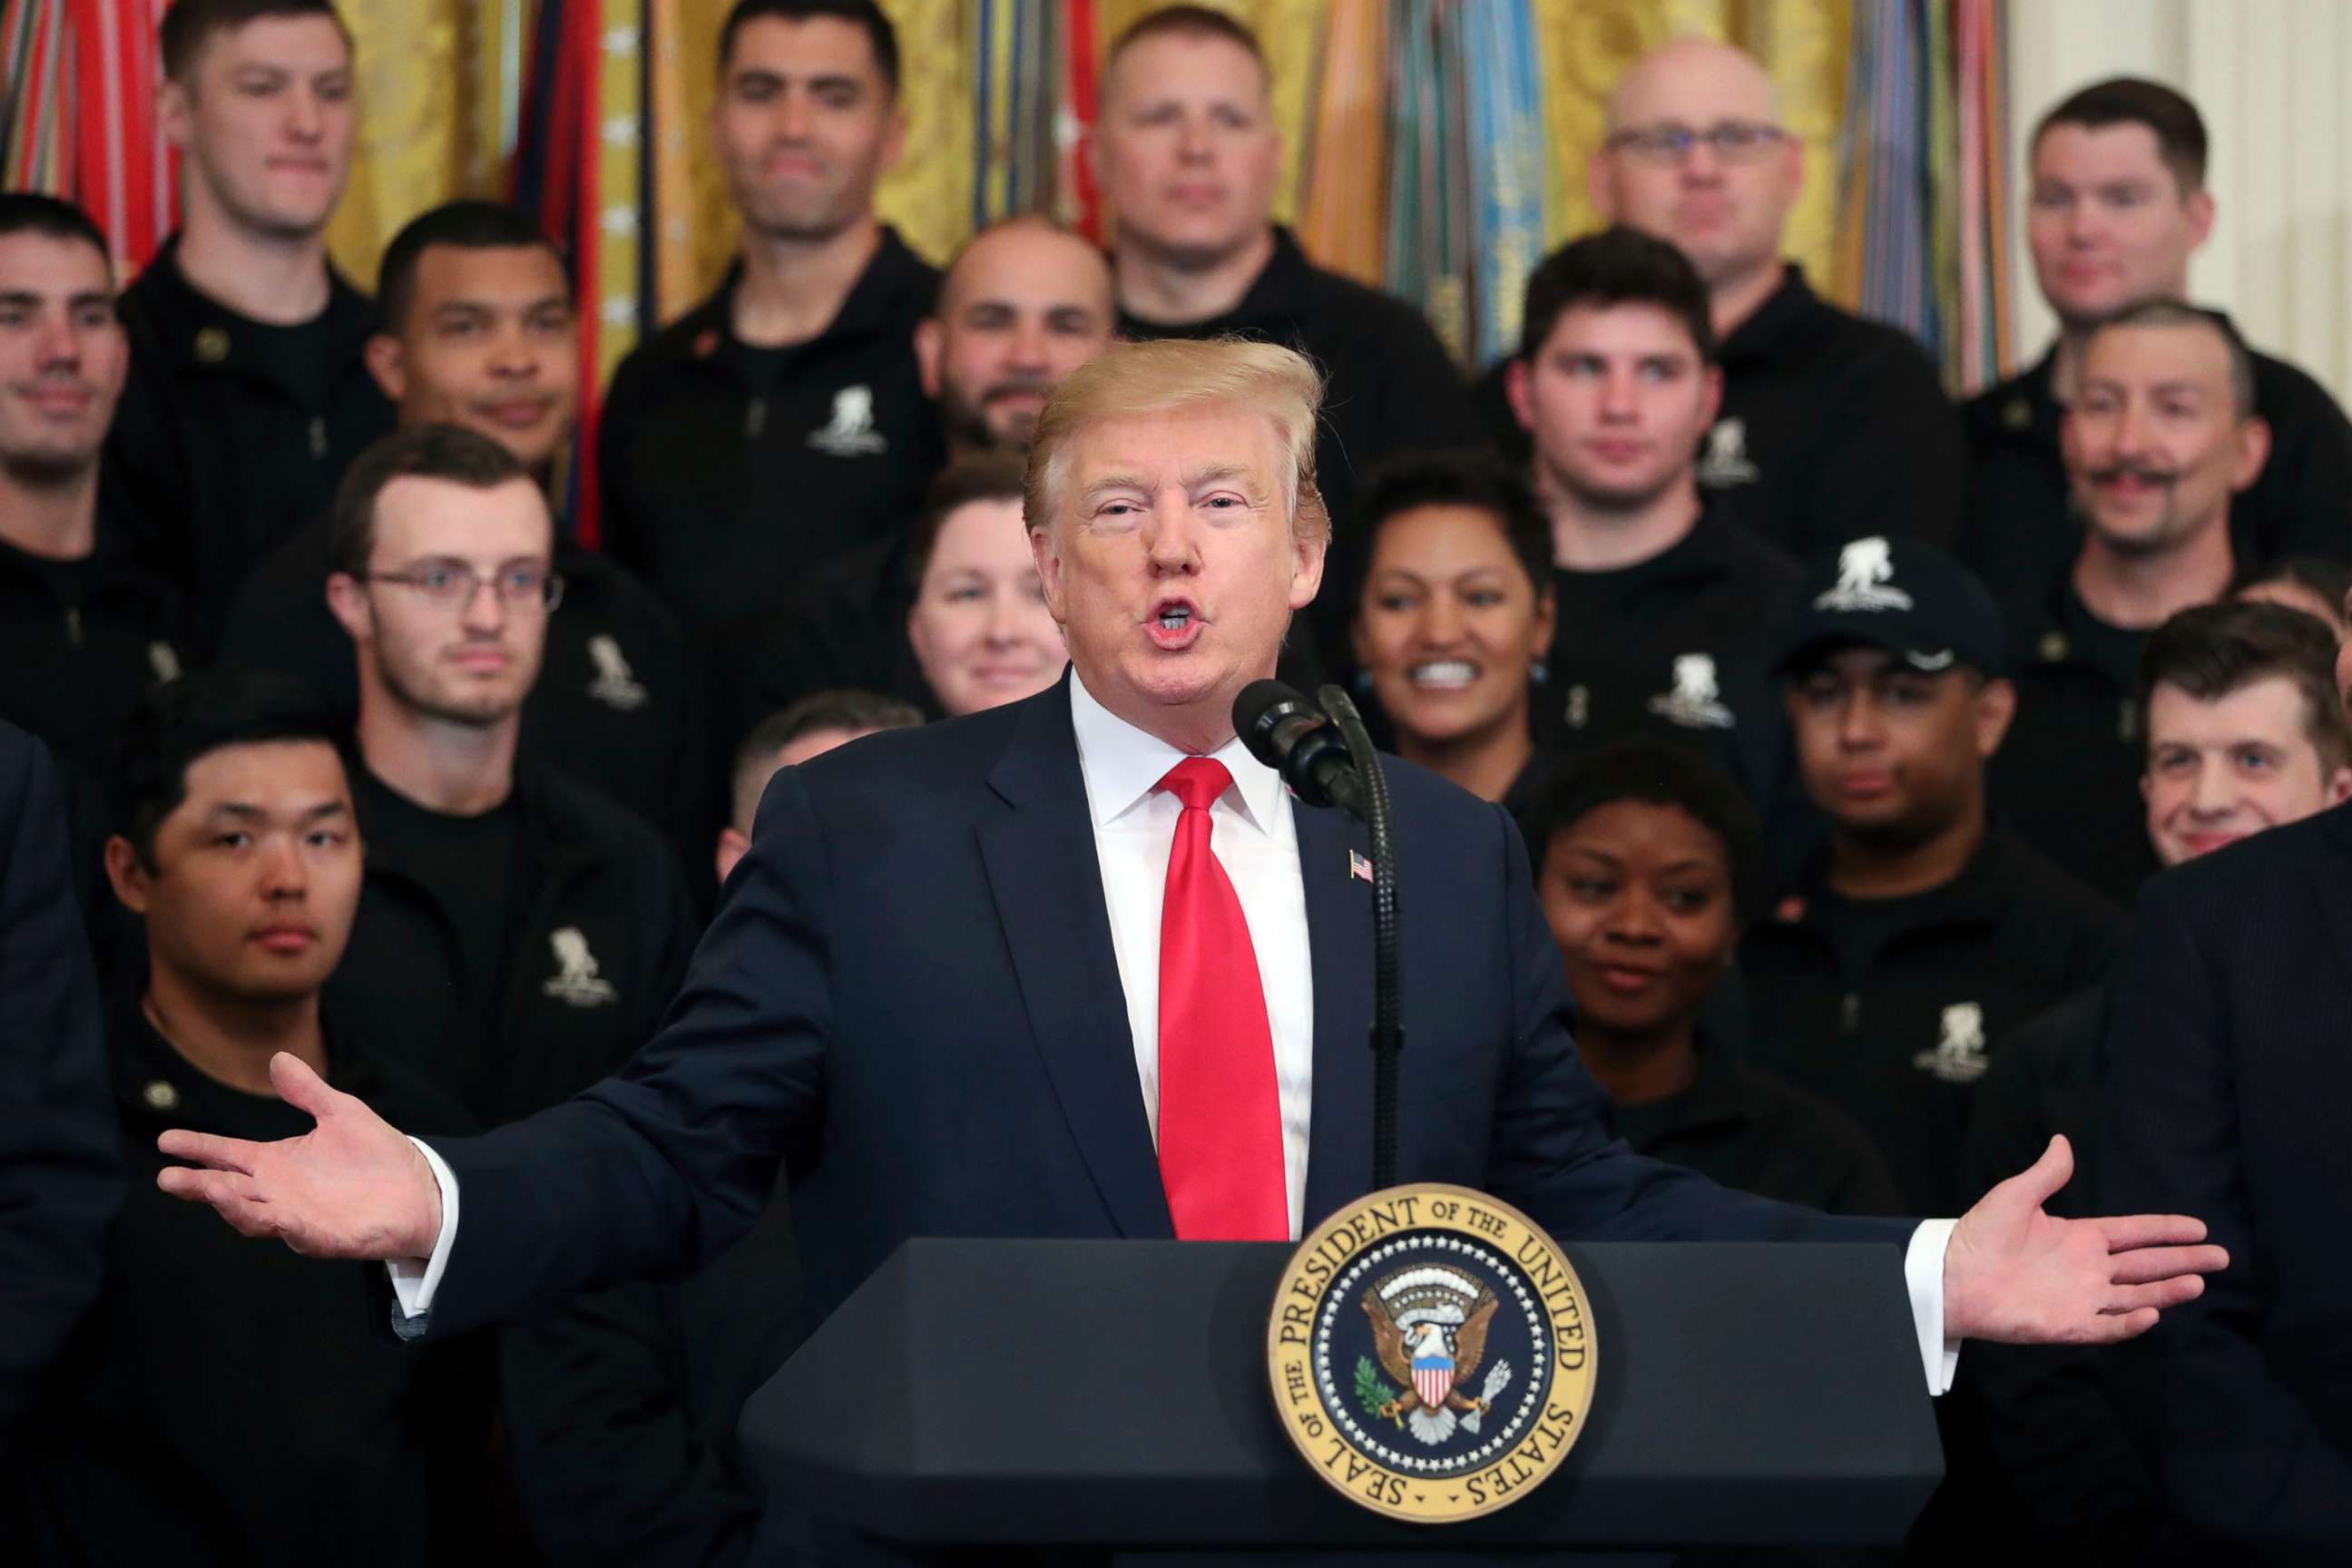 PHOTO: President Donald Trump speaks at a Wounded Warrior Project Soldier Ride event in the East Room of the White House, April 18, 2019.